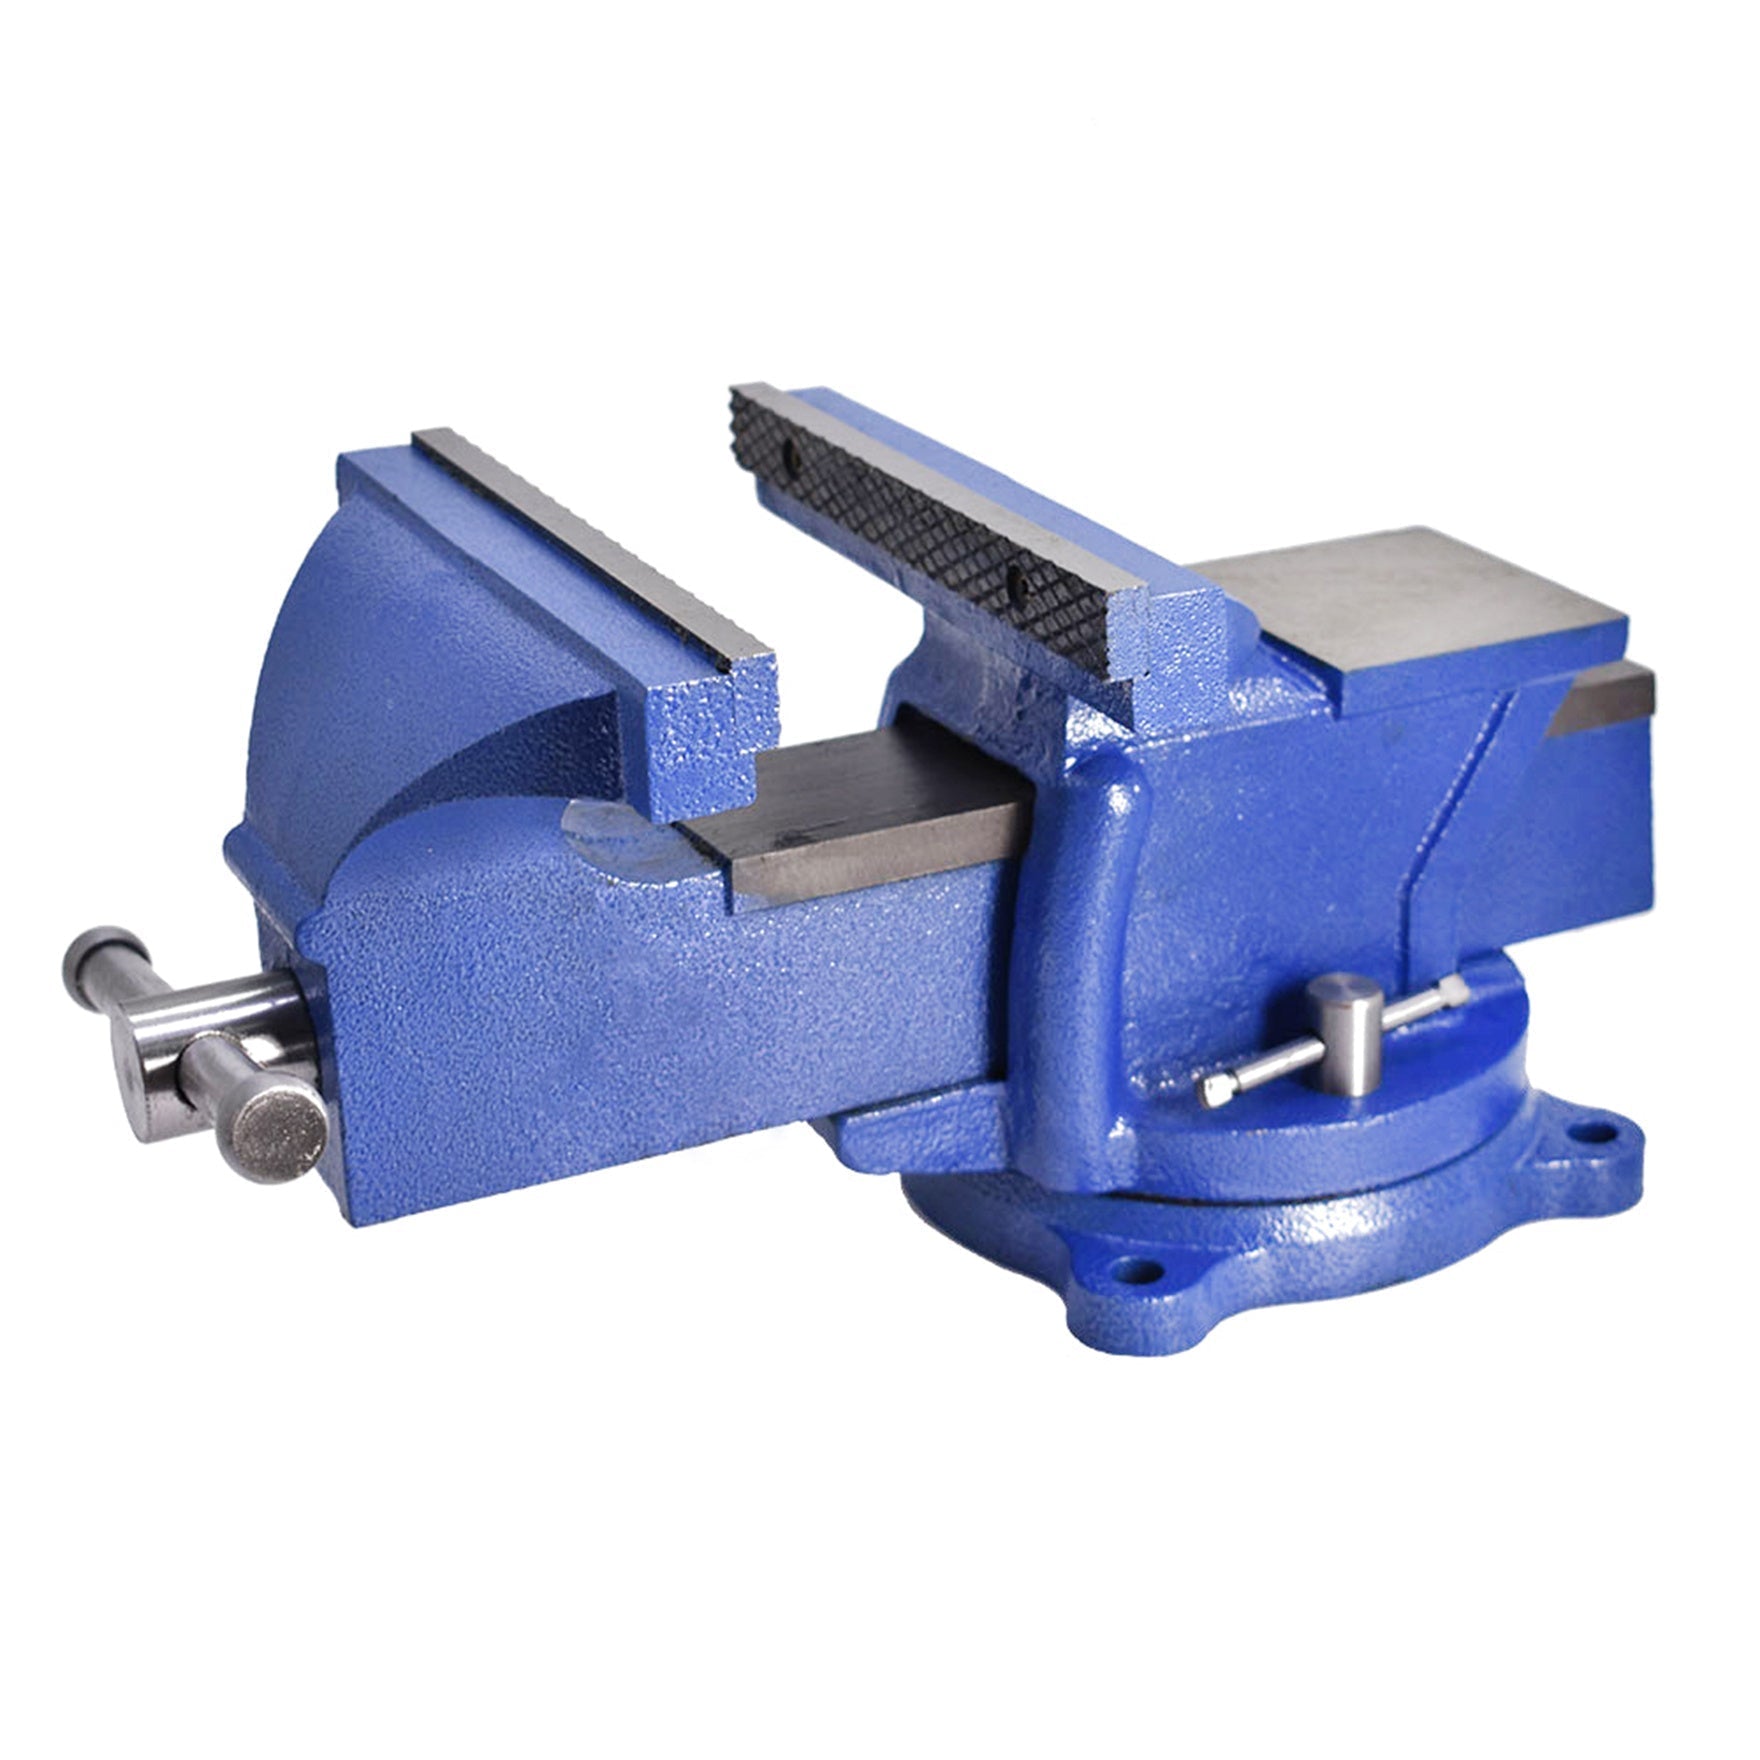 findmall 8" Swivel Bench Vise 8-Inch Heavy Duty Bench Vise Clamp Vises Locking Base Top Anvil Work Bench Fit for Home and Business Application FINDMALLPARTS